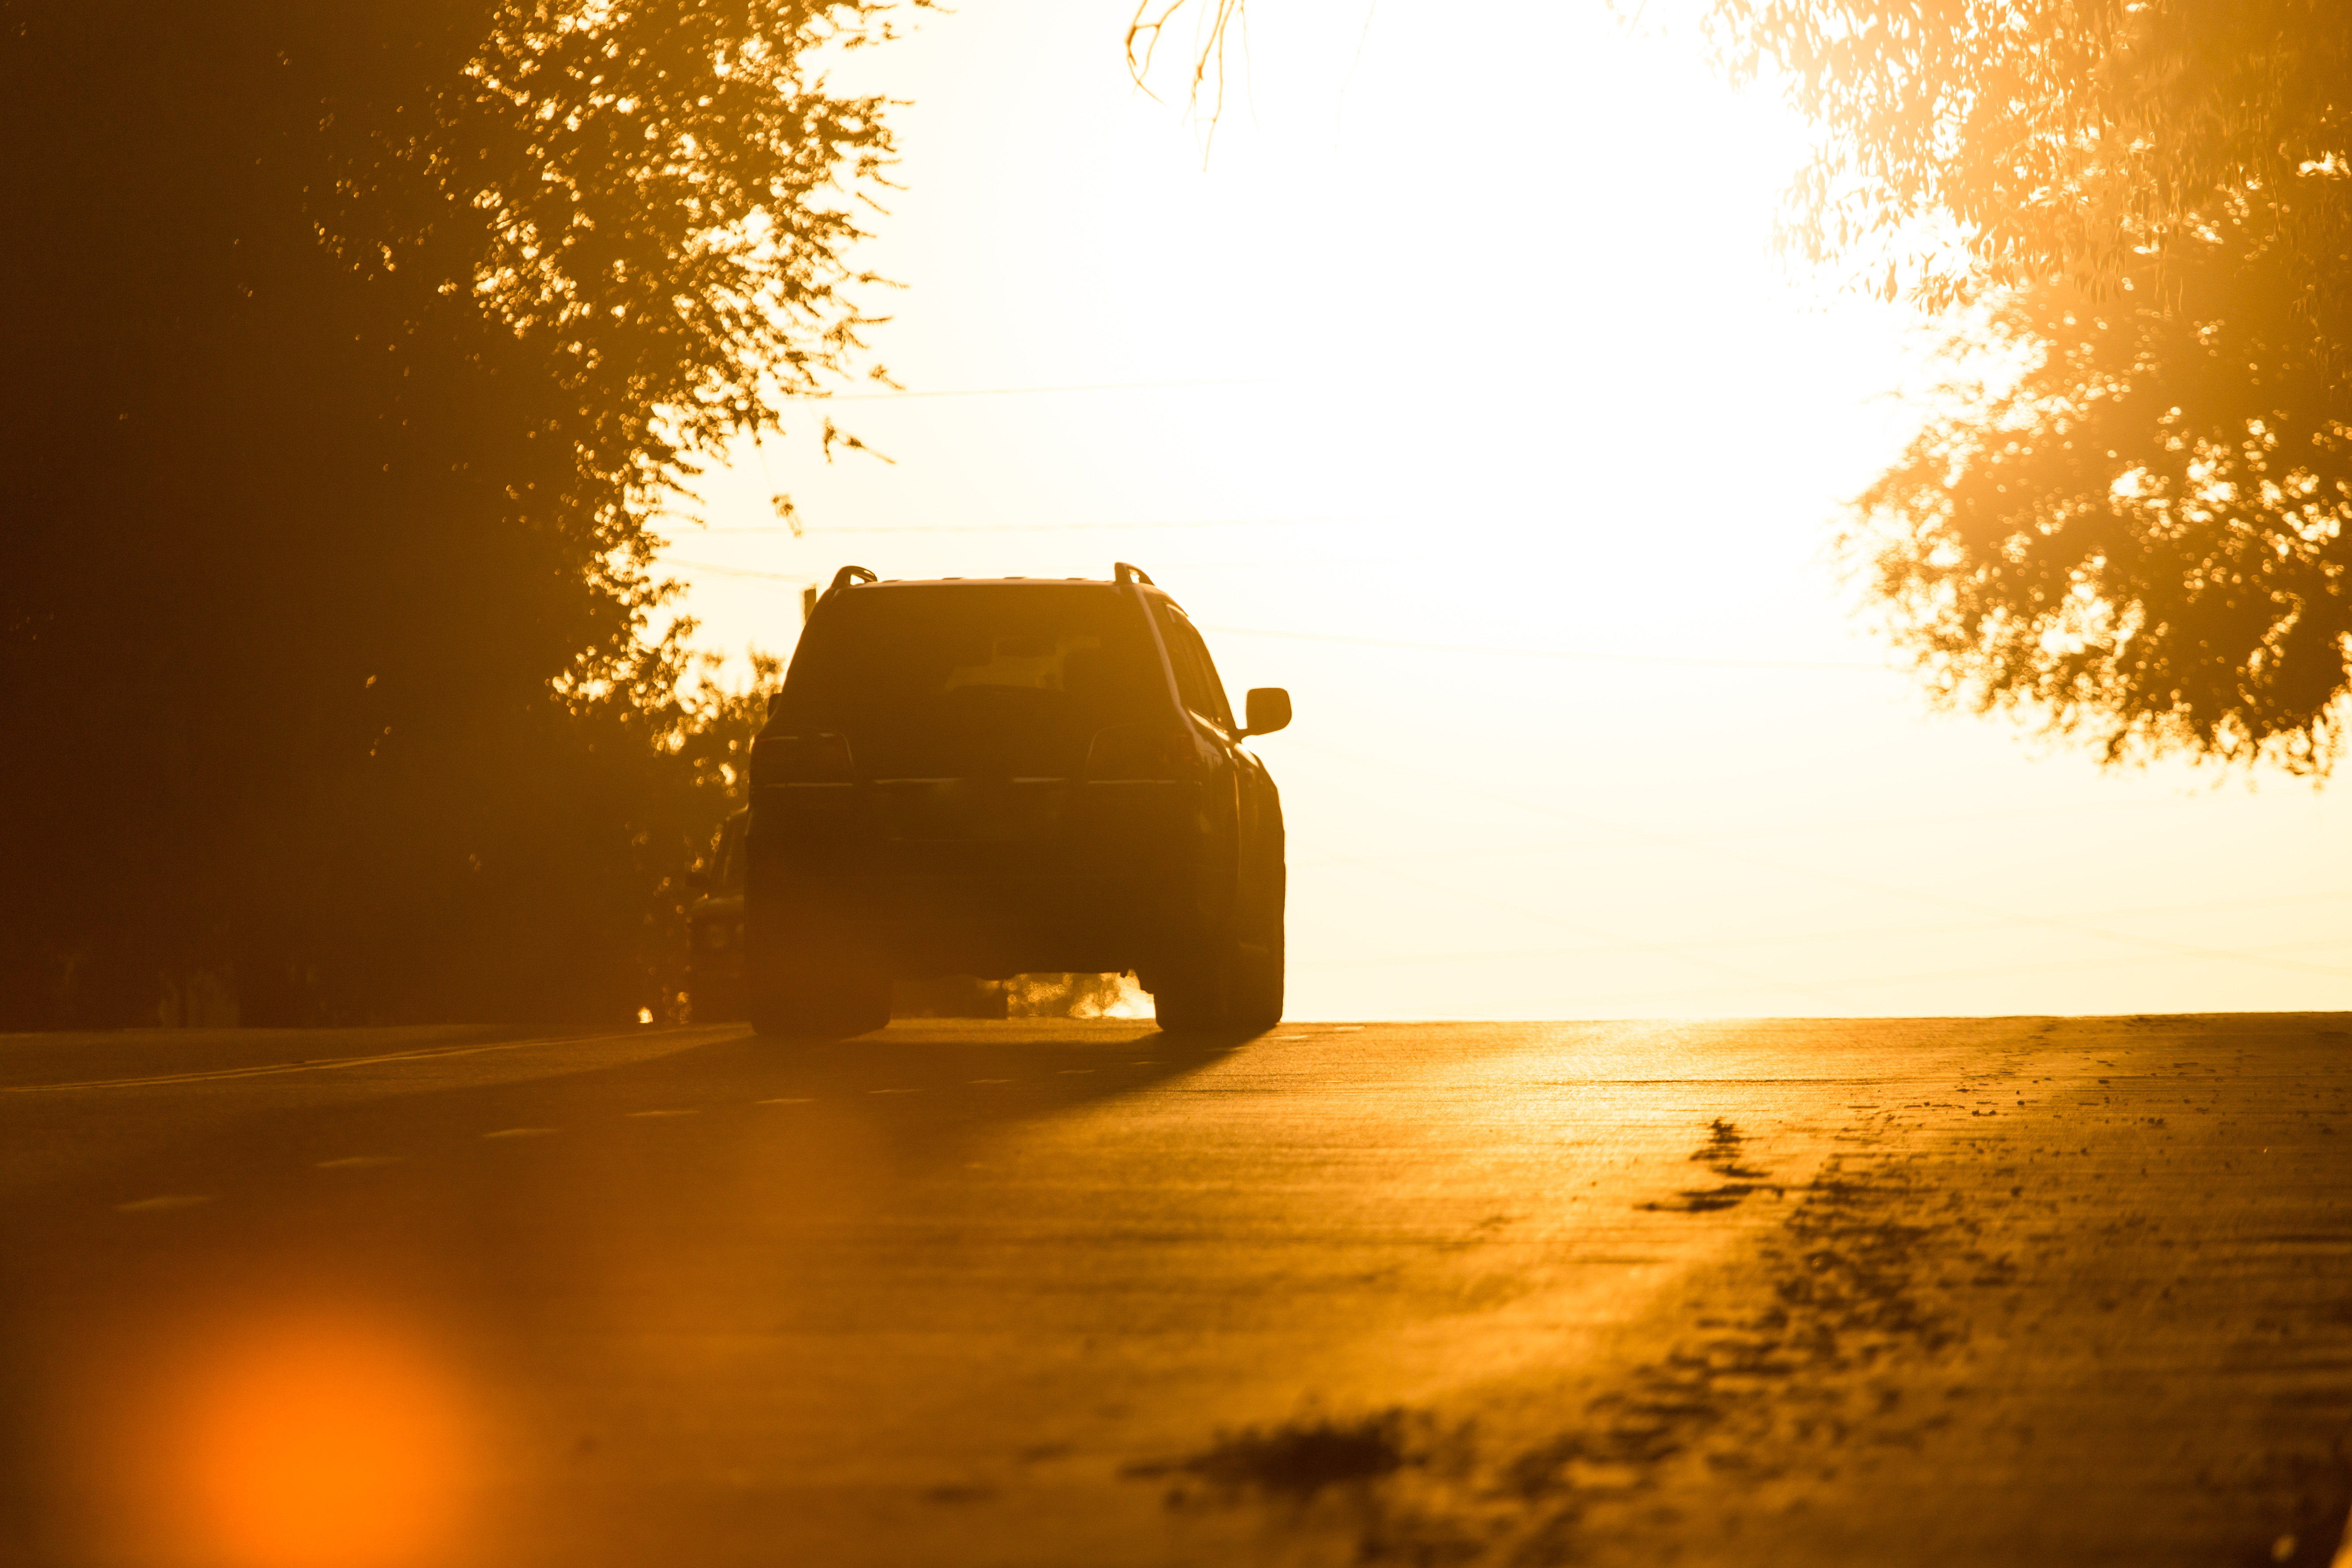 Car rides into sunset | Shutterstock